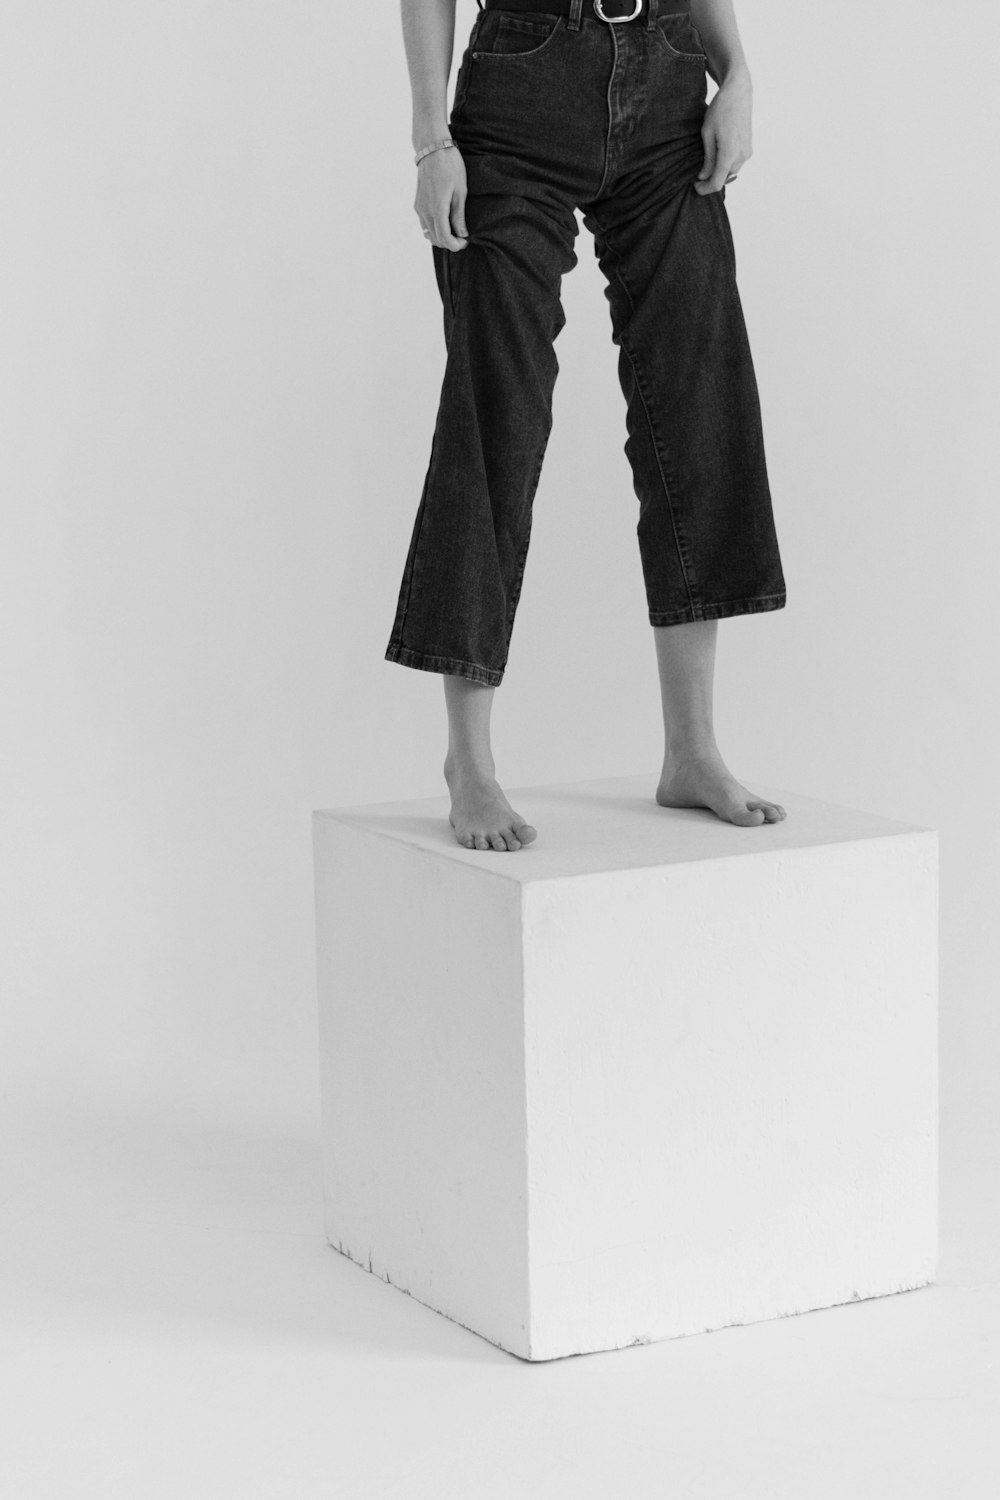 a woman standing on top of a white block